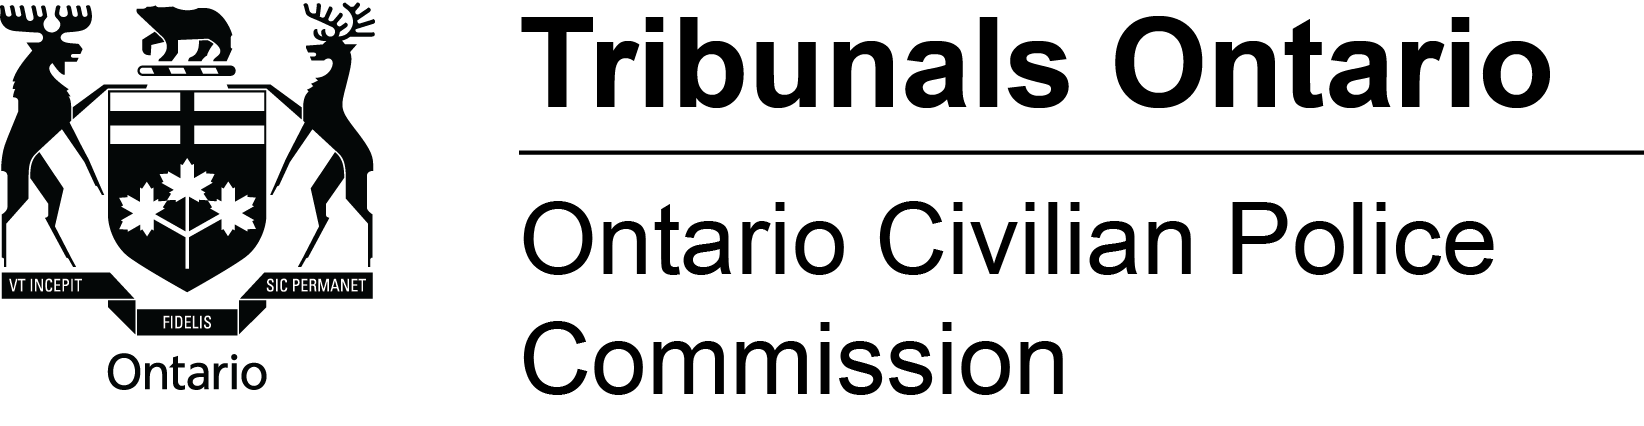 Ontario Civilian Police Commission logo. The logo is made up of the Ontario Coat of Arms and the words Ontario Civilian Police Commission.